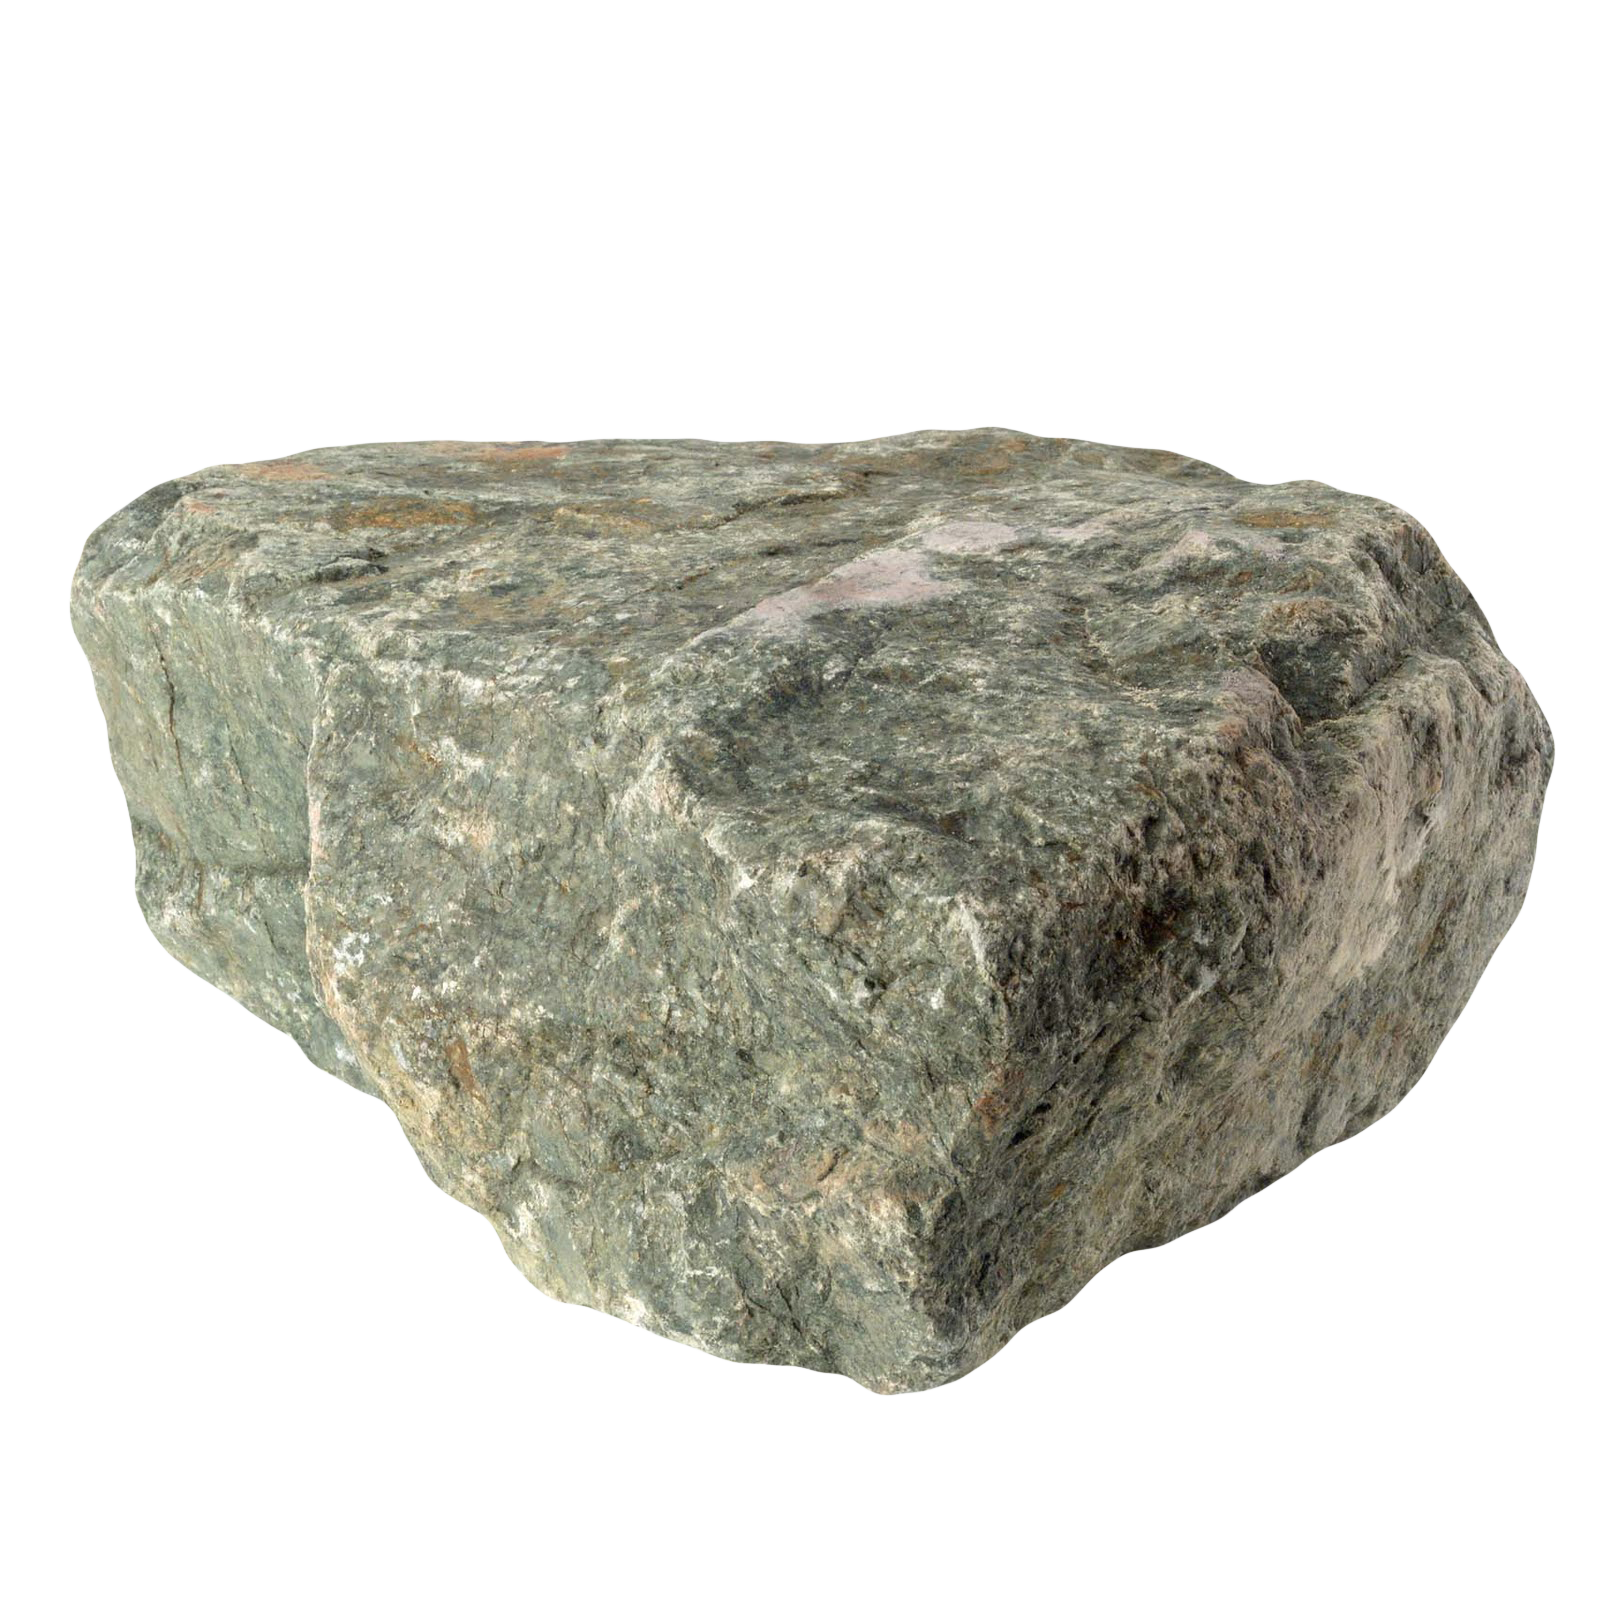 Stone PNG images, rock PNG, rocks PNG images free download